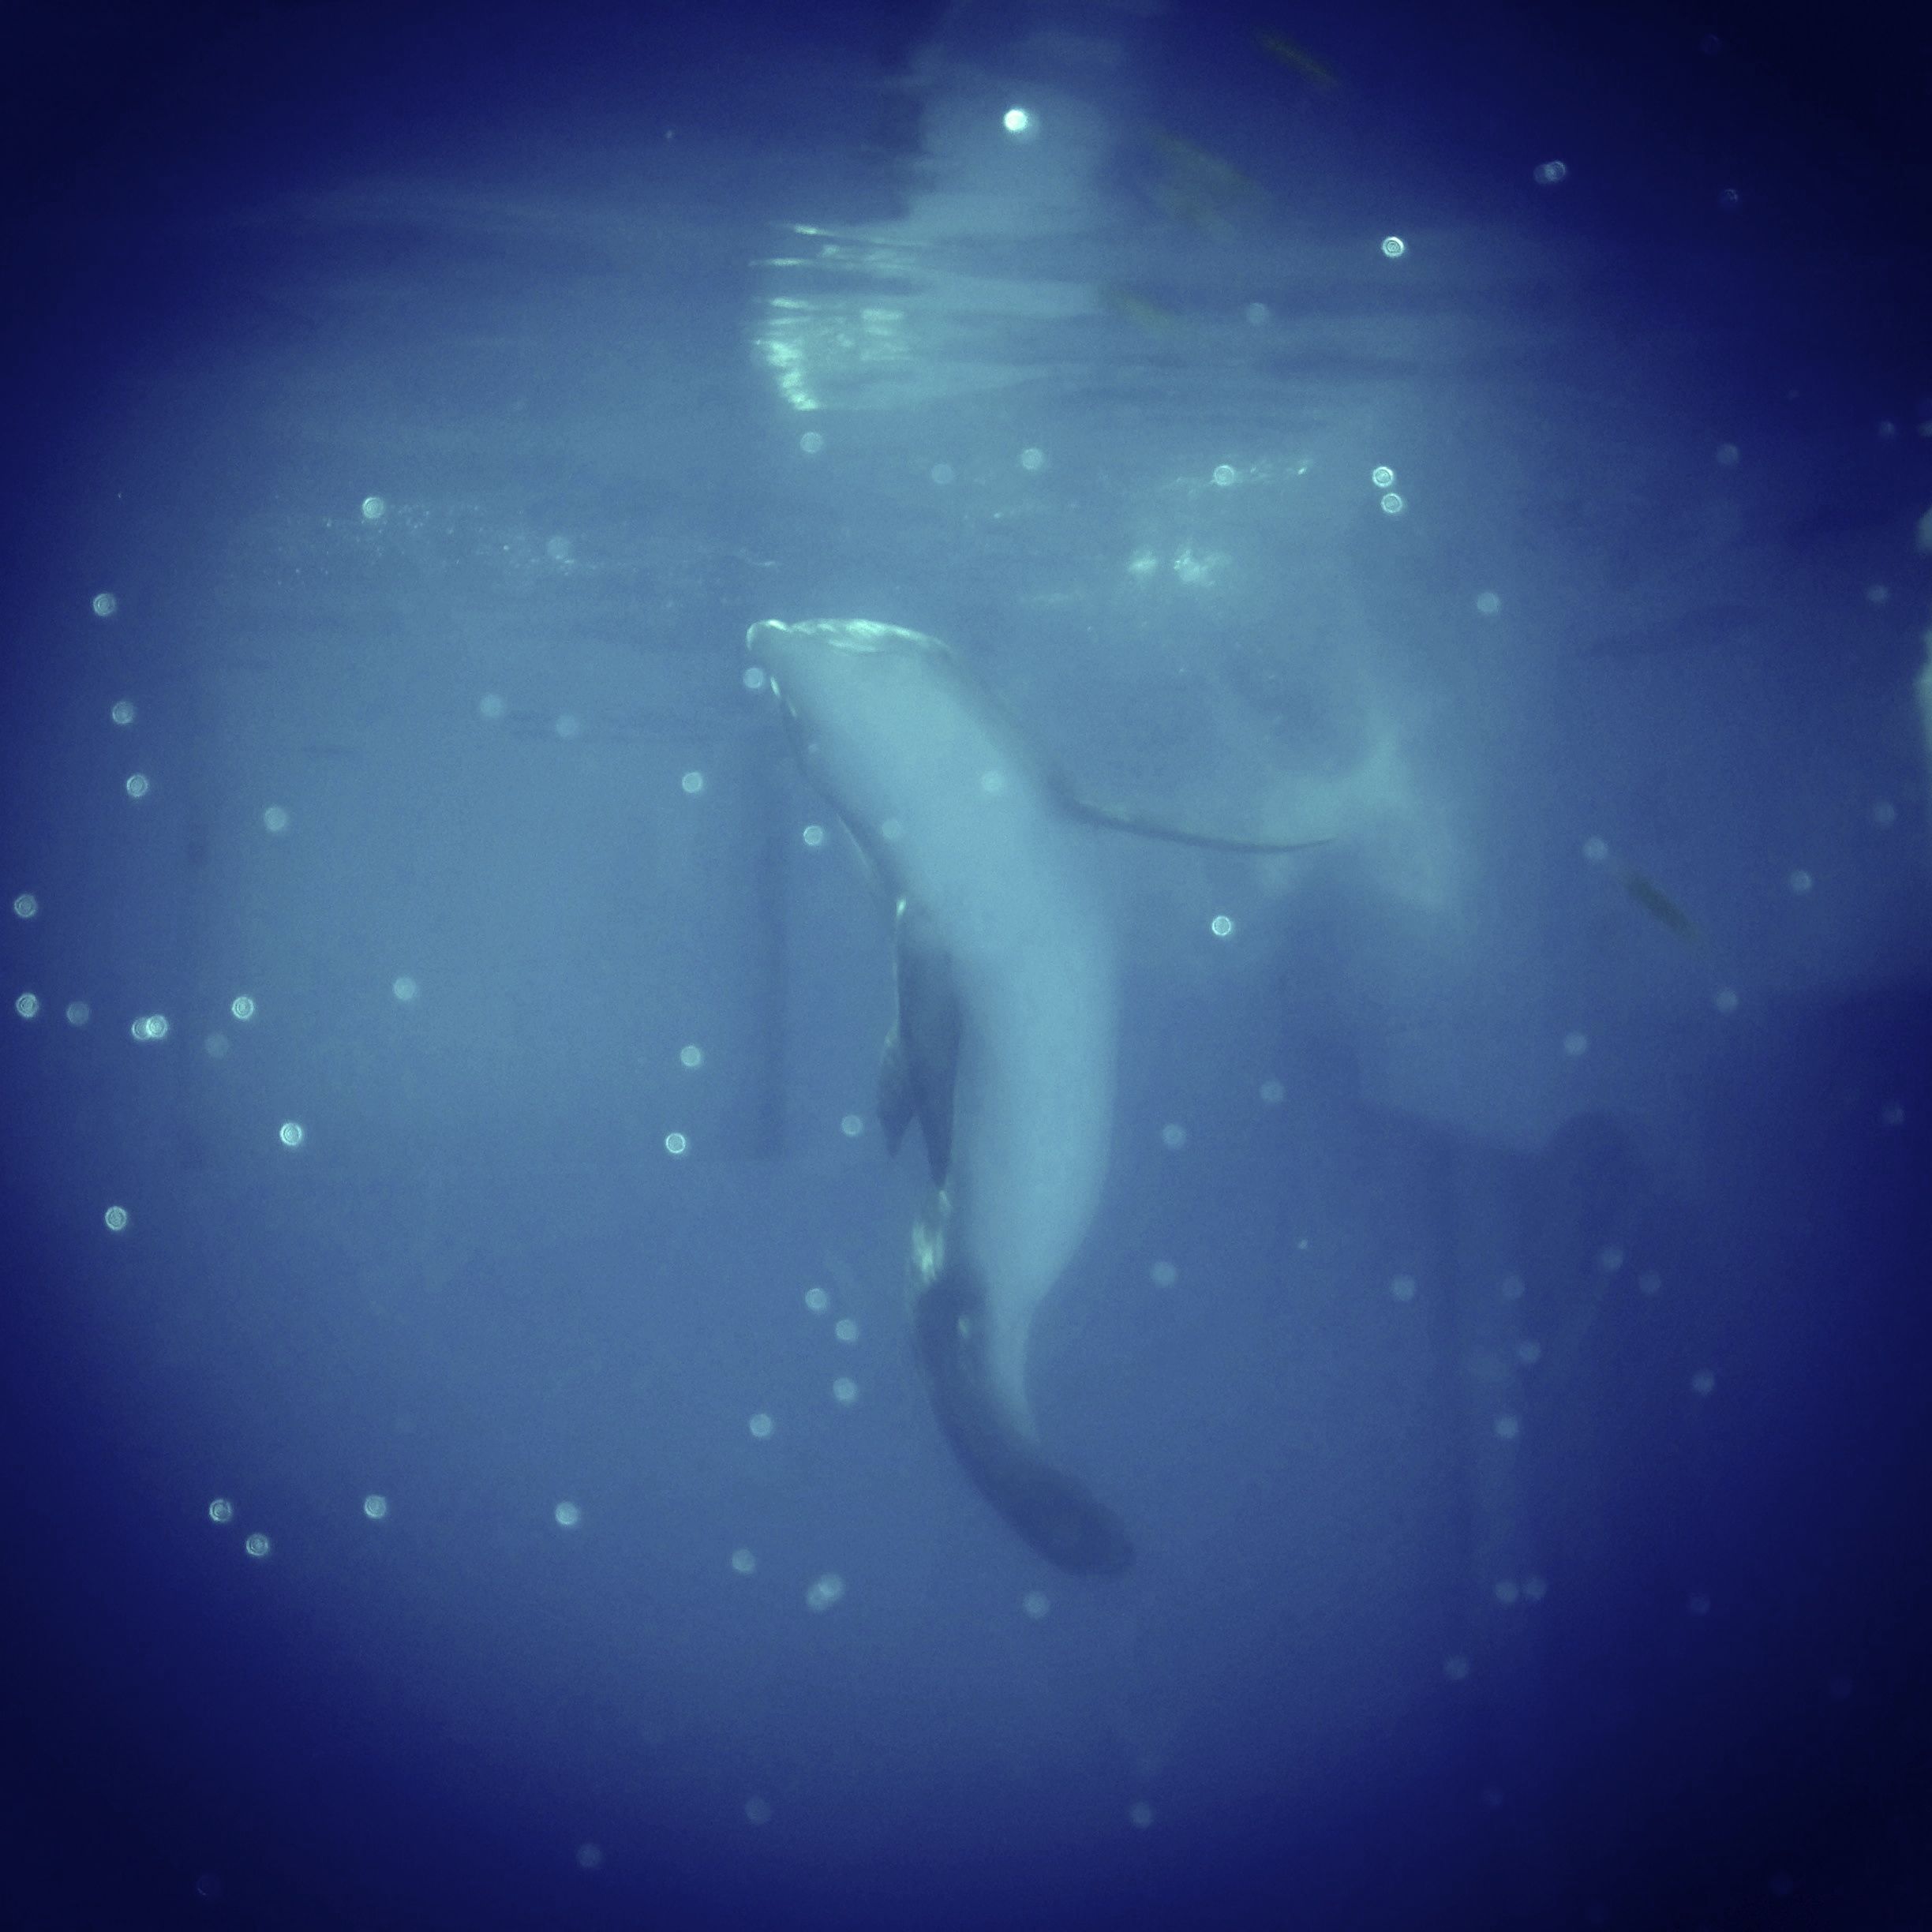 A Letter To Winter The Dolphin @CMAquarium